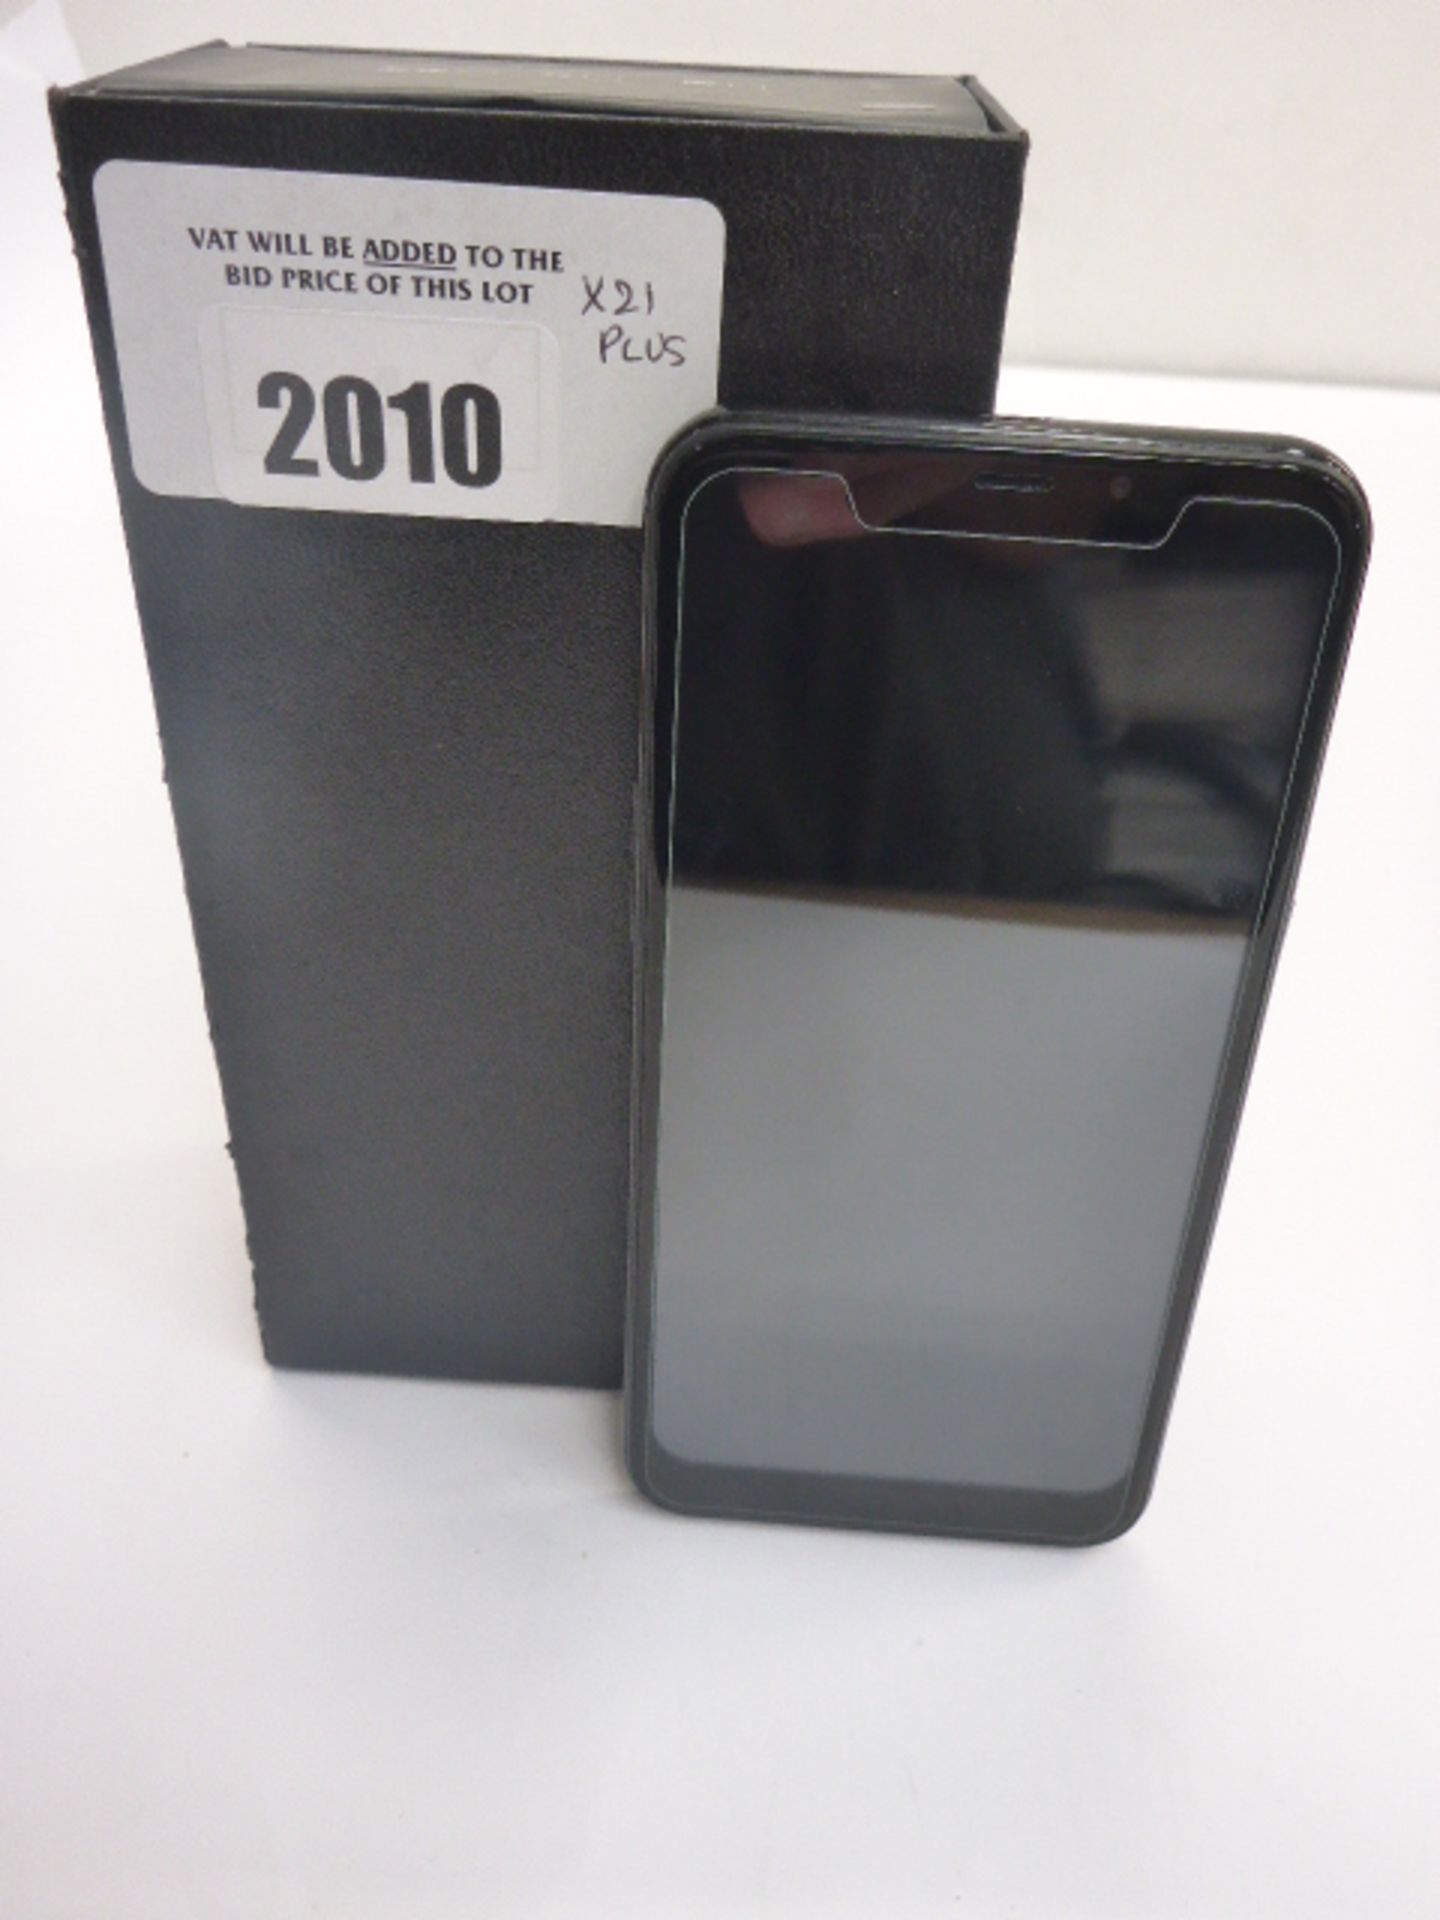 Android x21 plus mobile phone in black with box.